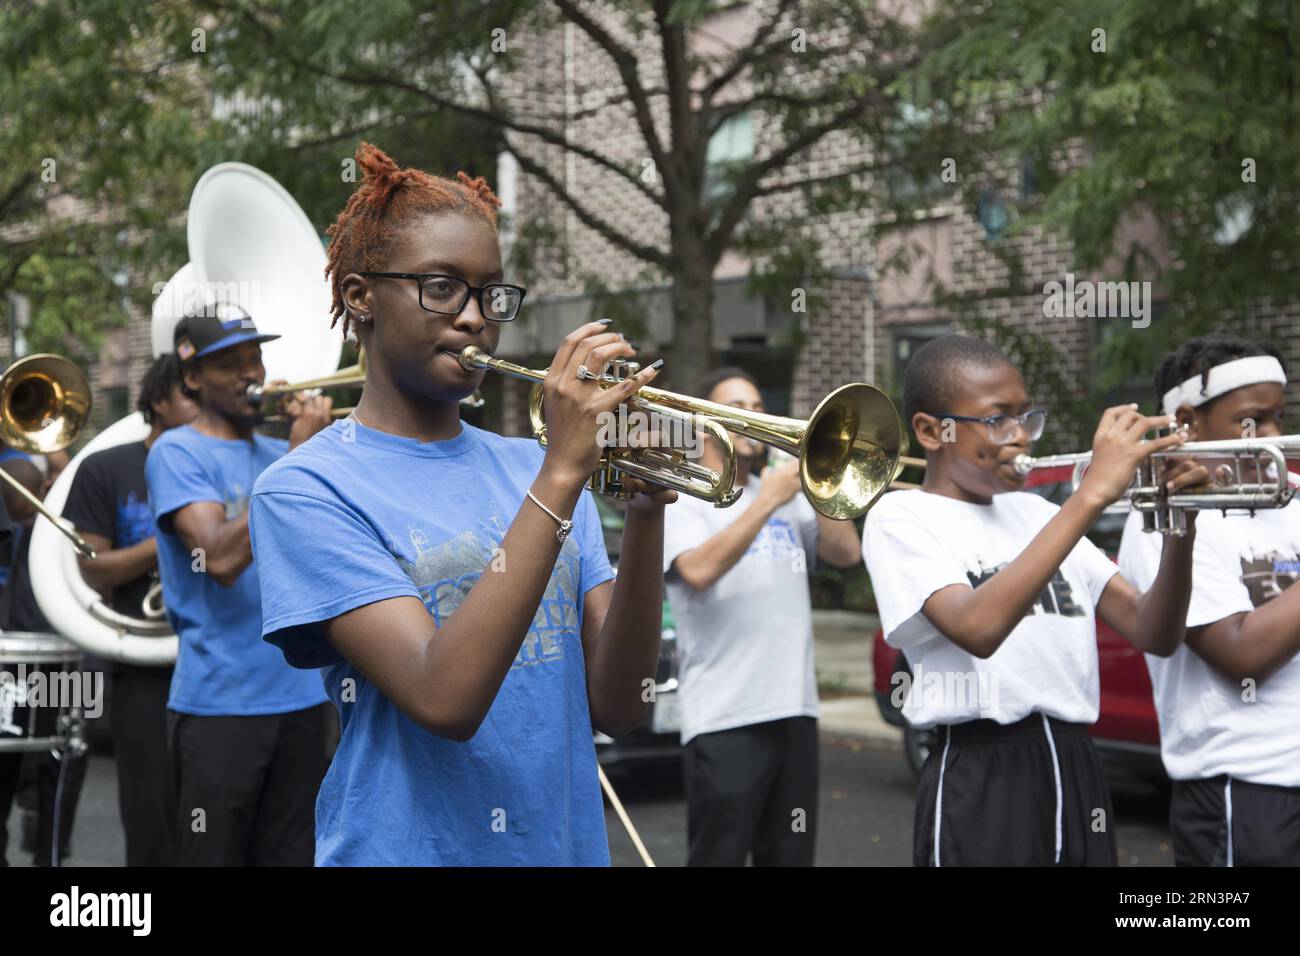 Empire Marching Elite marches and plays at the annual Hip Hop Parade for Social Justice celebrating the 50th anniversary of Hip Hop through  Bedford Stuyvesant, Brooklyn, New York. Stock Photo